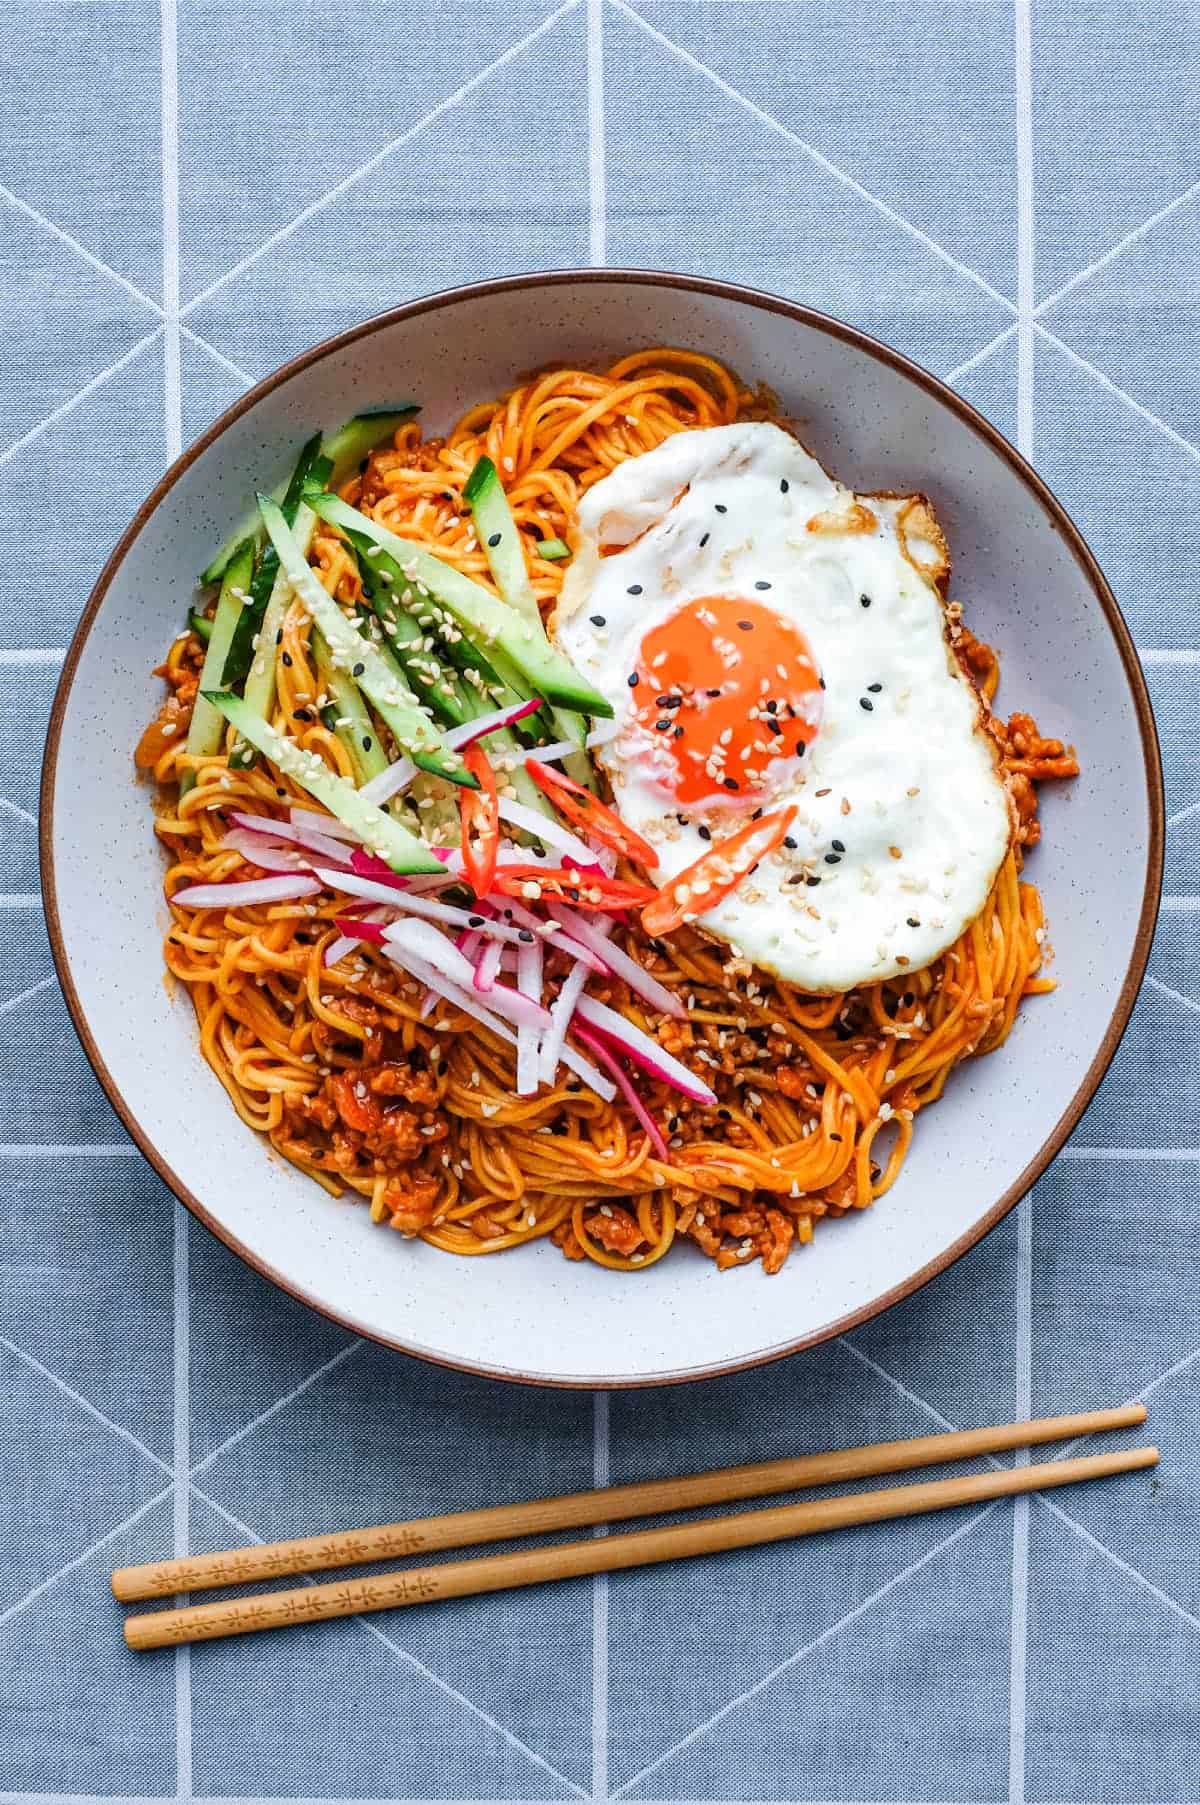 A bowl of Korean Gochujang Noodles with Pork with a fried egg on top